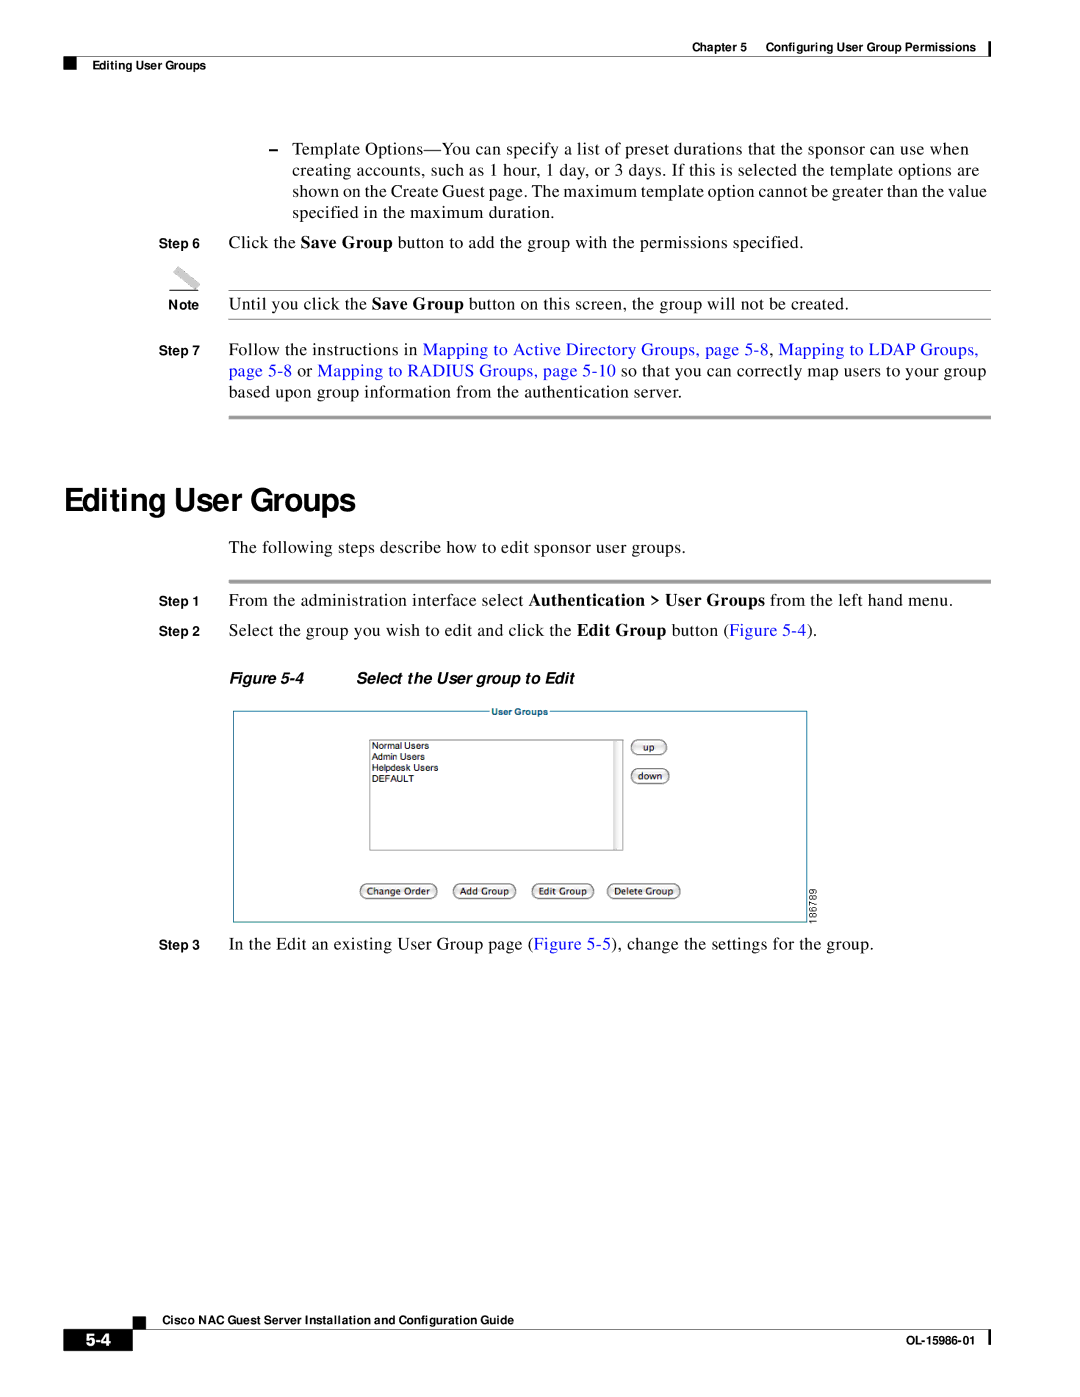 Cisco Systems OL-15986-01 manual Editing User Groups, Select the User group to Edit 